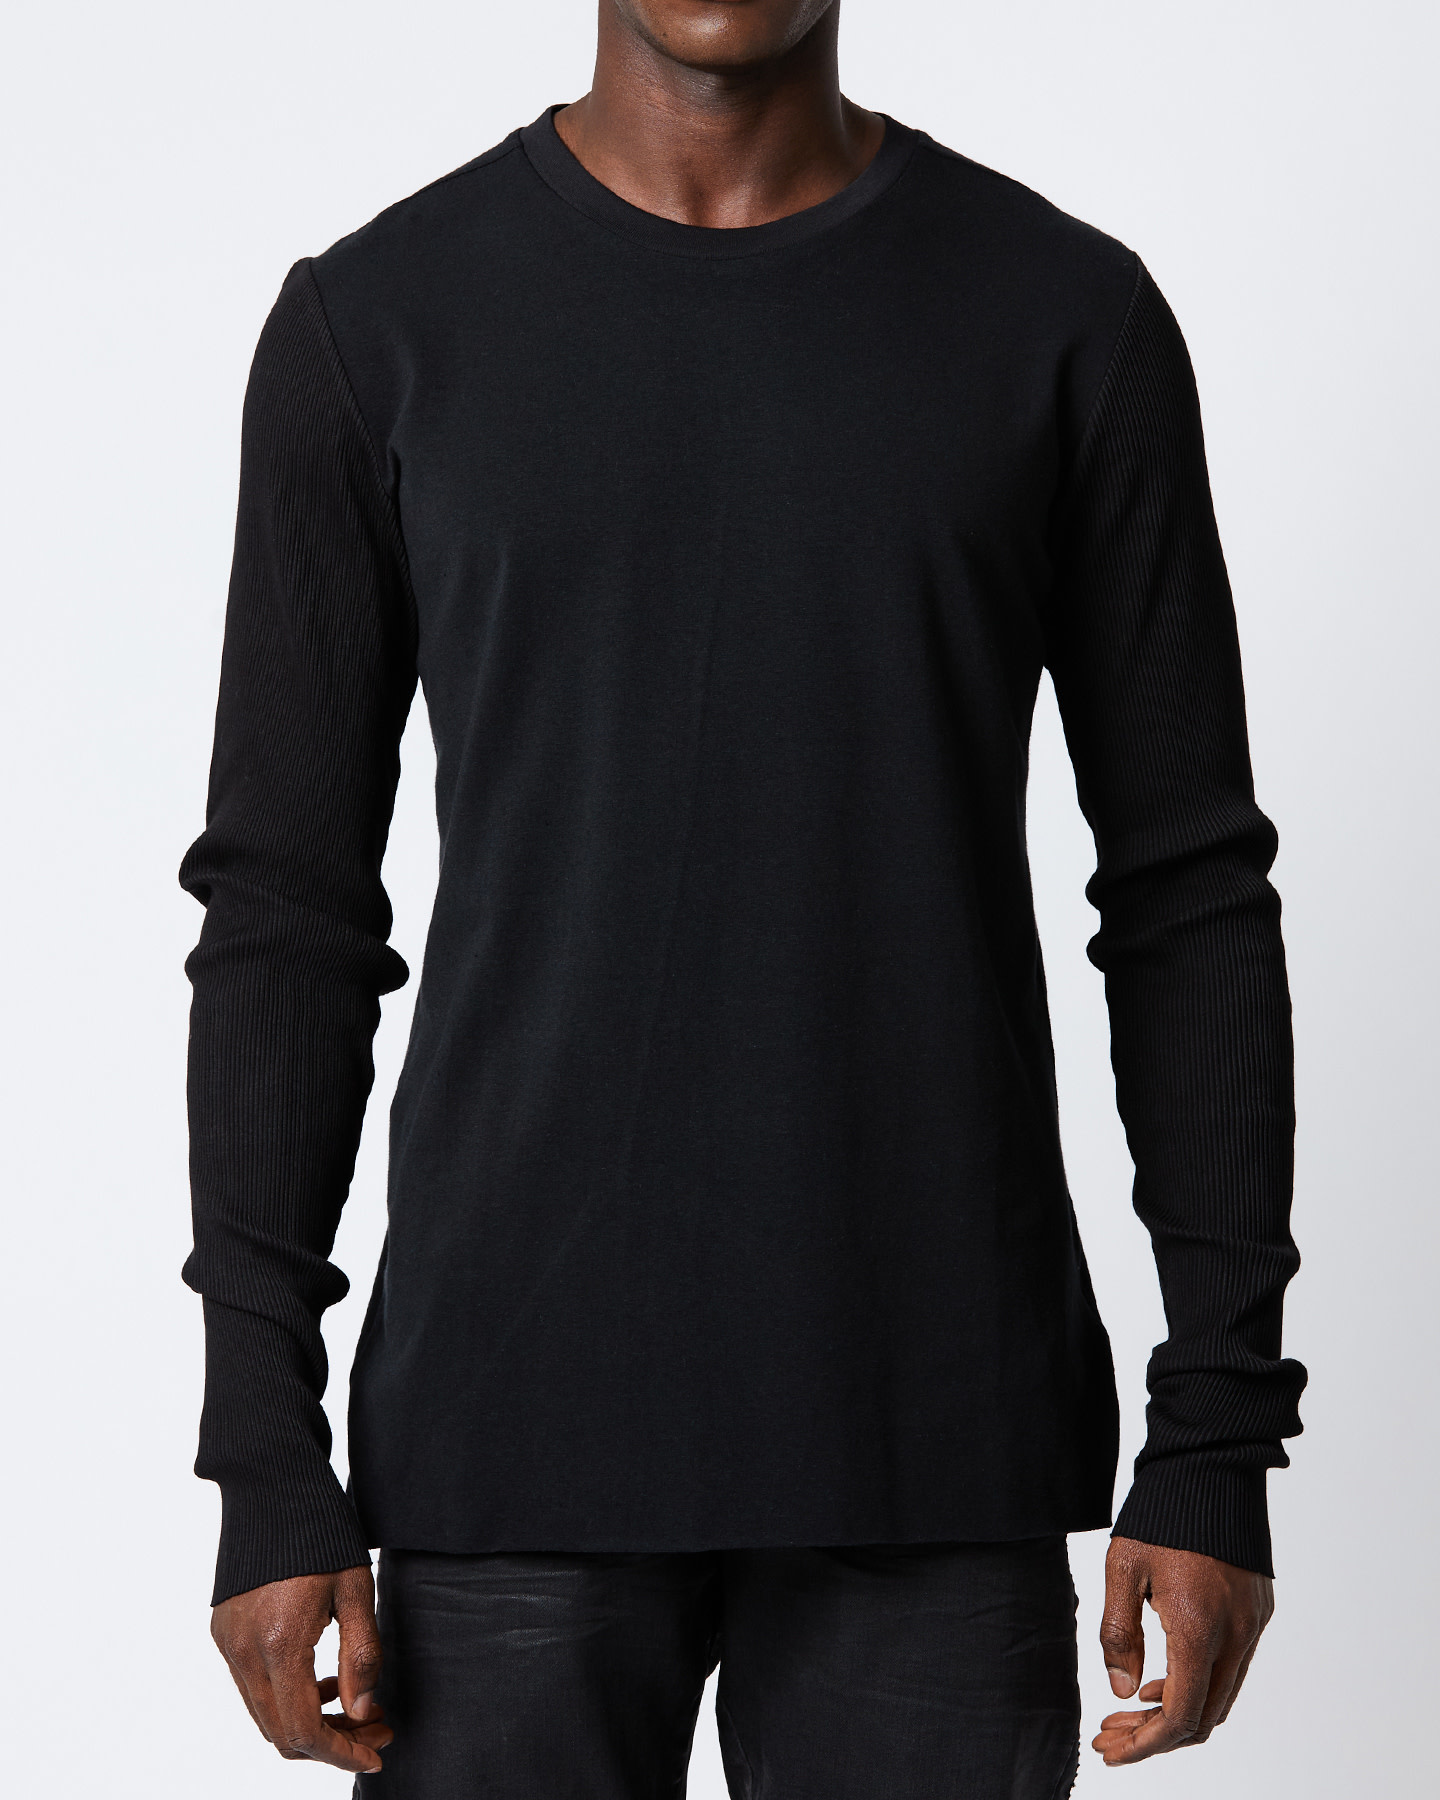 COTTON & BAMBOO RIB ARM FITTED LONGSLEEVE - BLACK